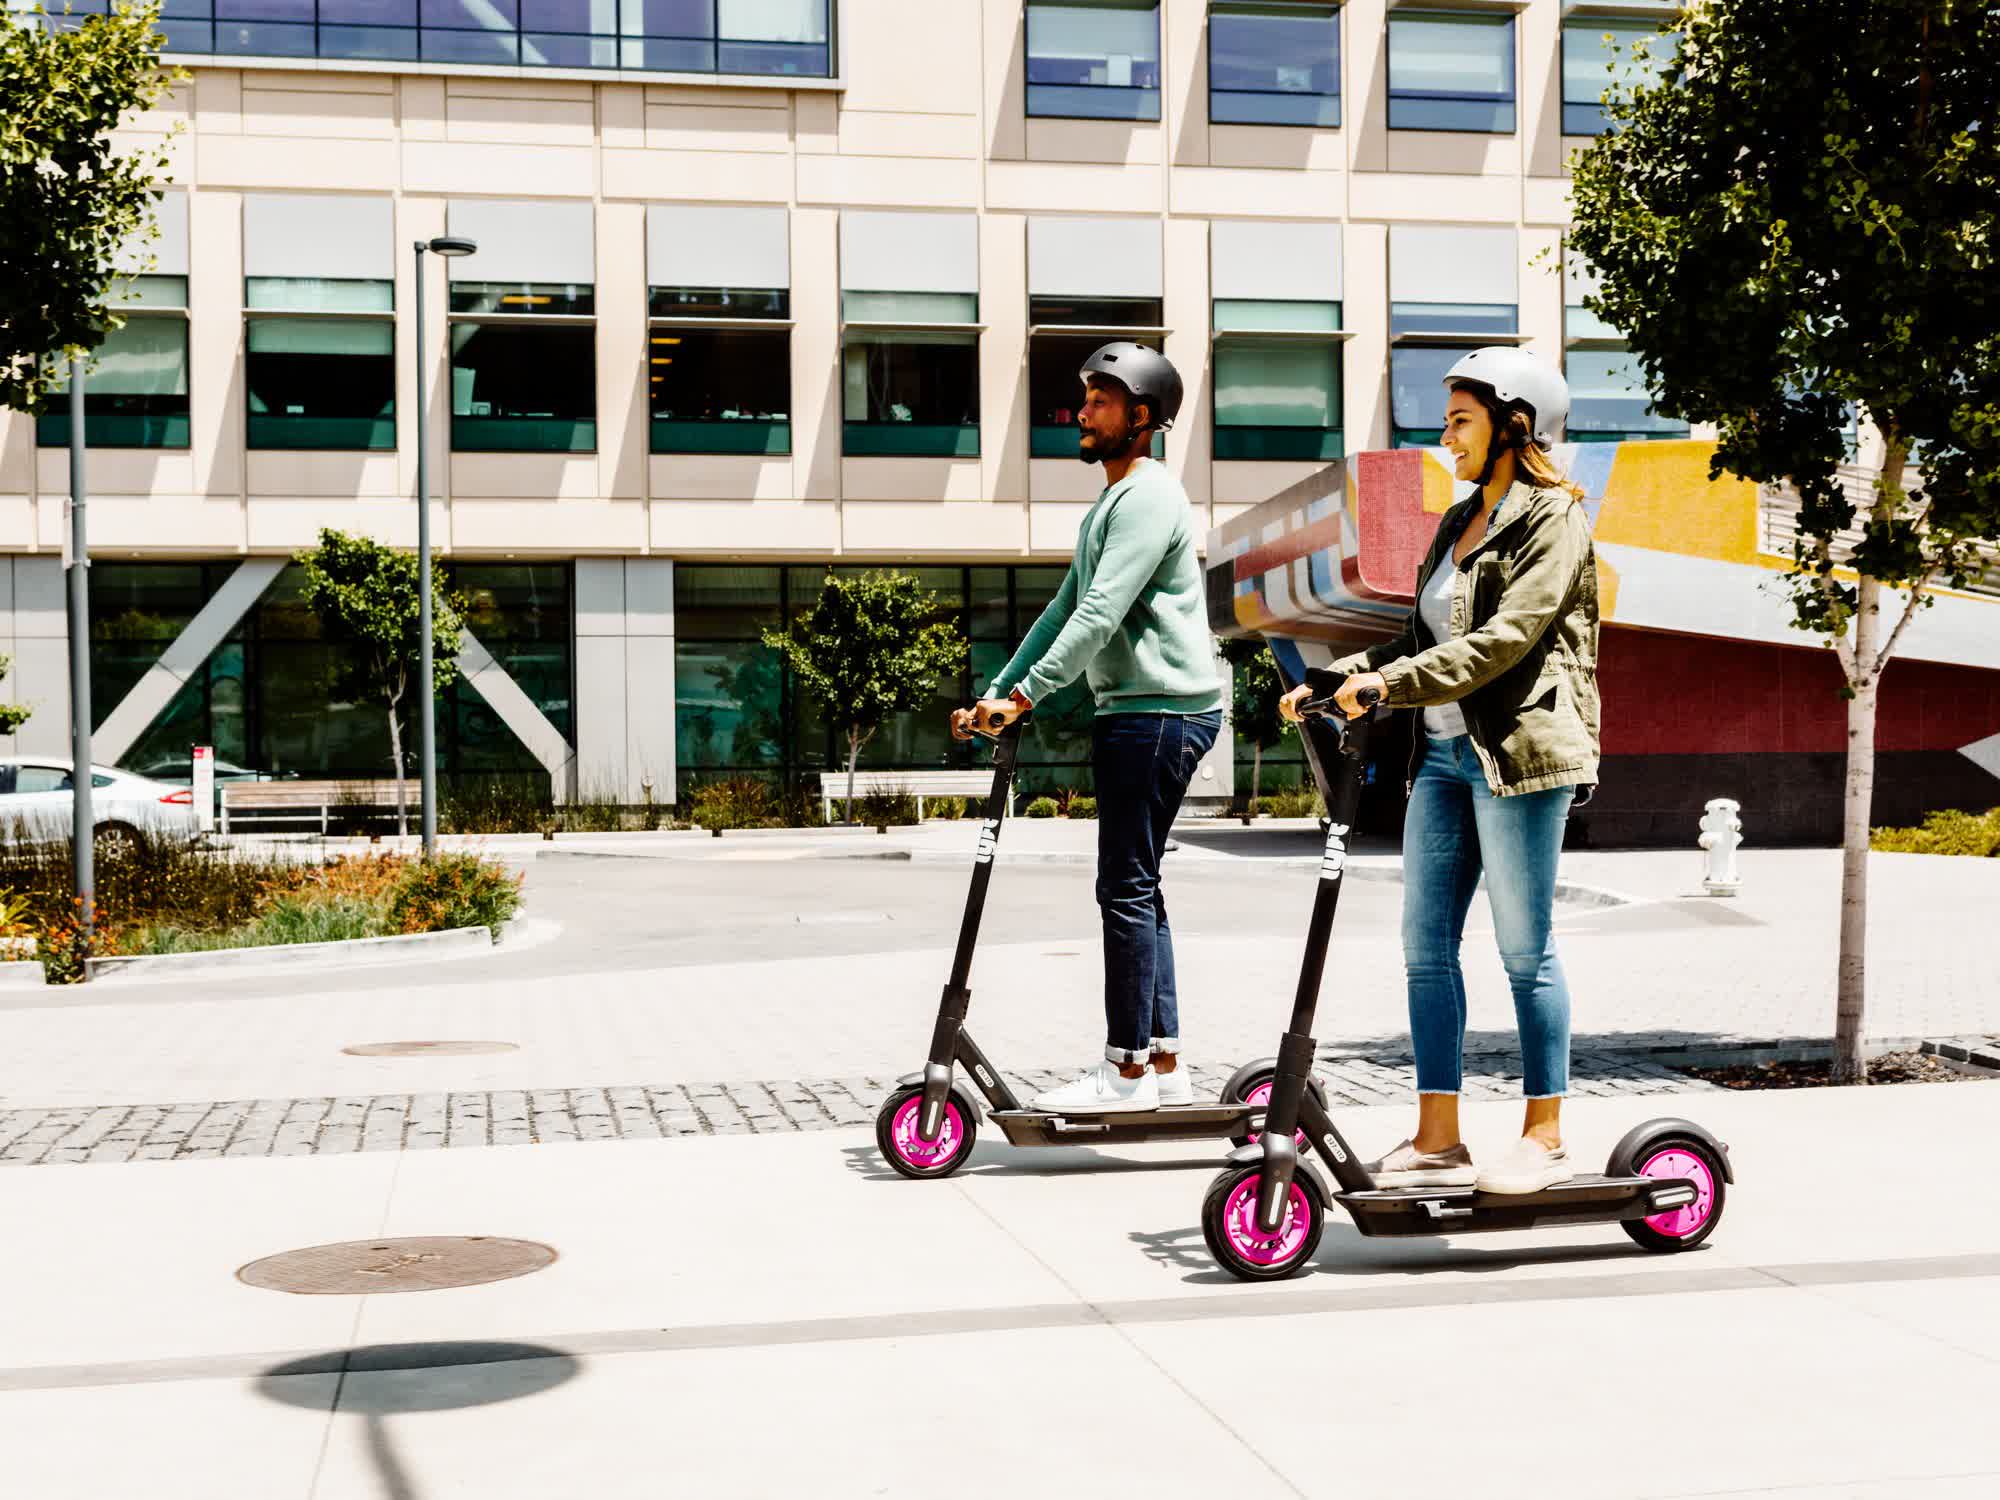 Less than two-weeks later, Miami rolls back its ban on shared electric scooters